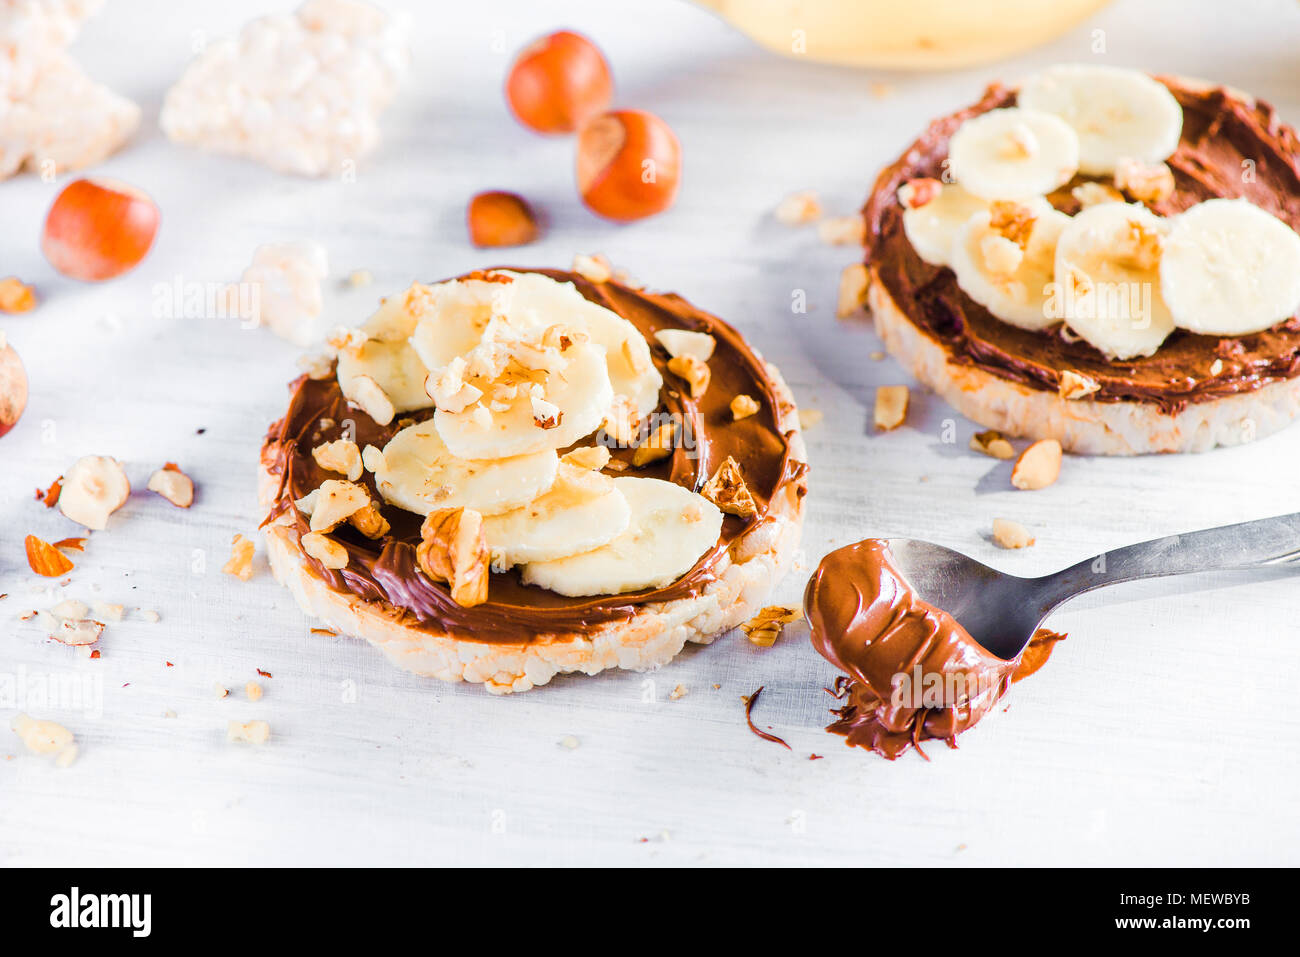 Crisp bread banana and chocolate snack. Healthy breakfast with hazel nuts. High key diet concept. Stock Photo